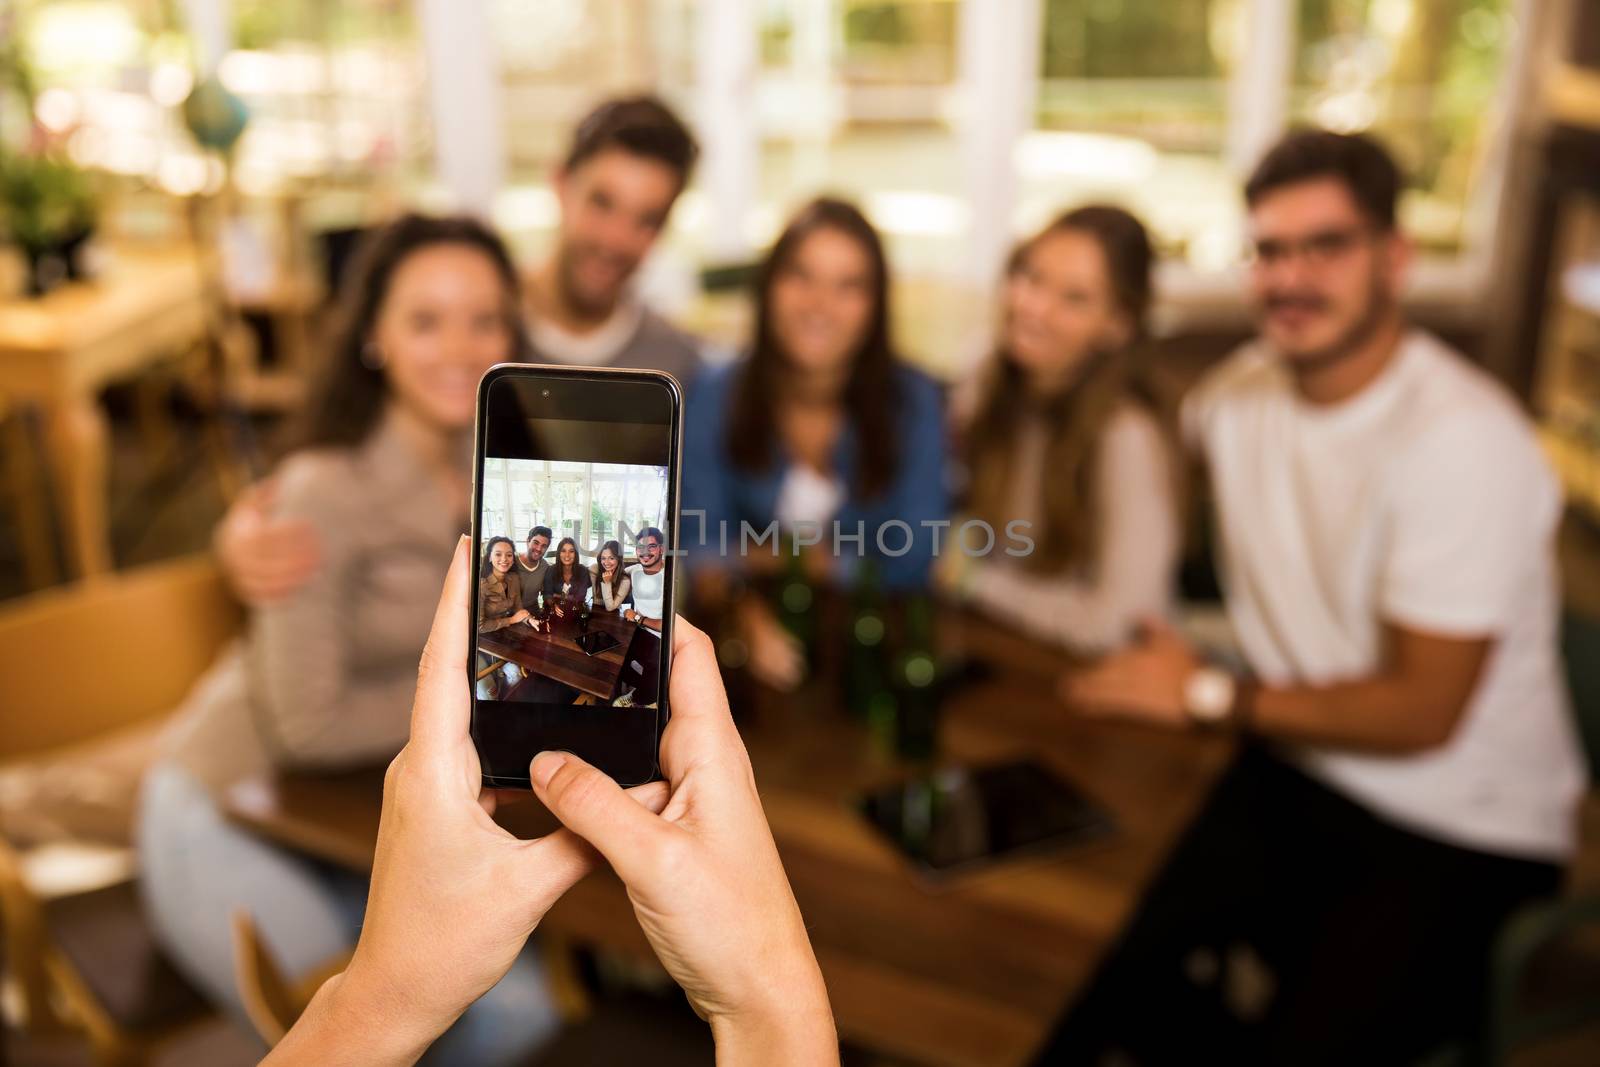 Taking a photo of a group of friends at the bar 